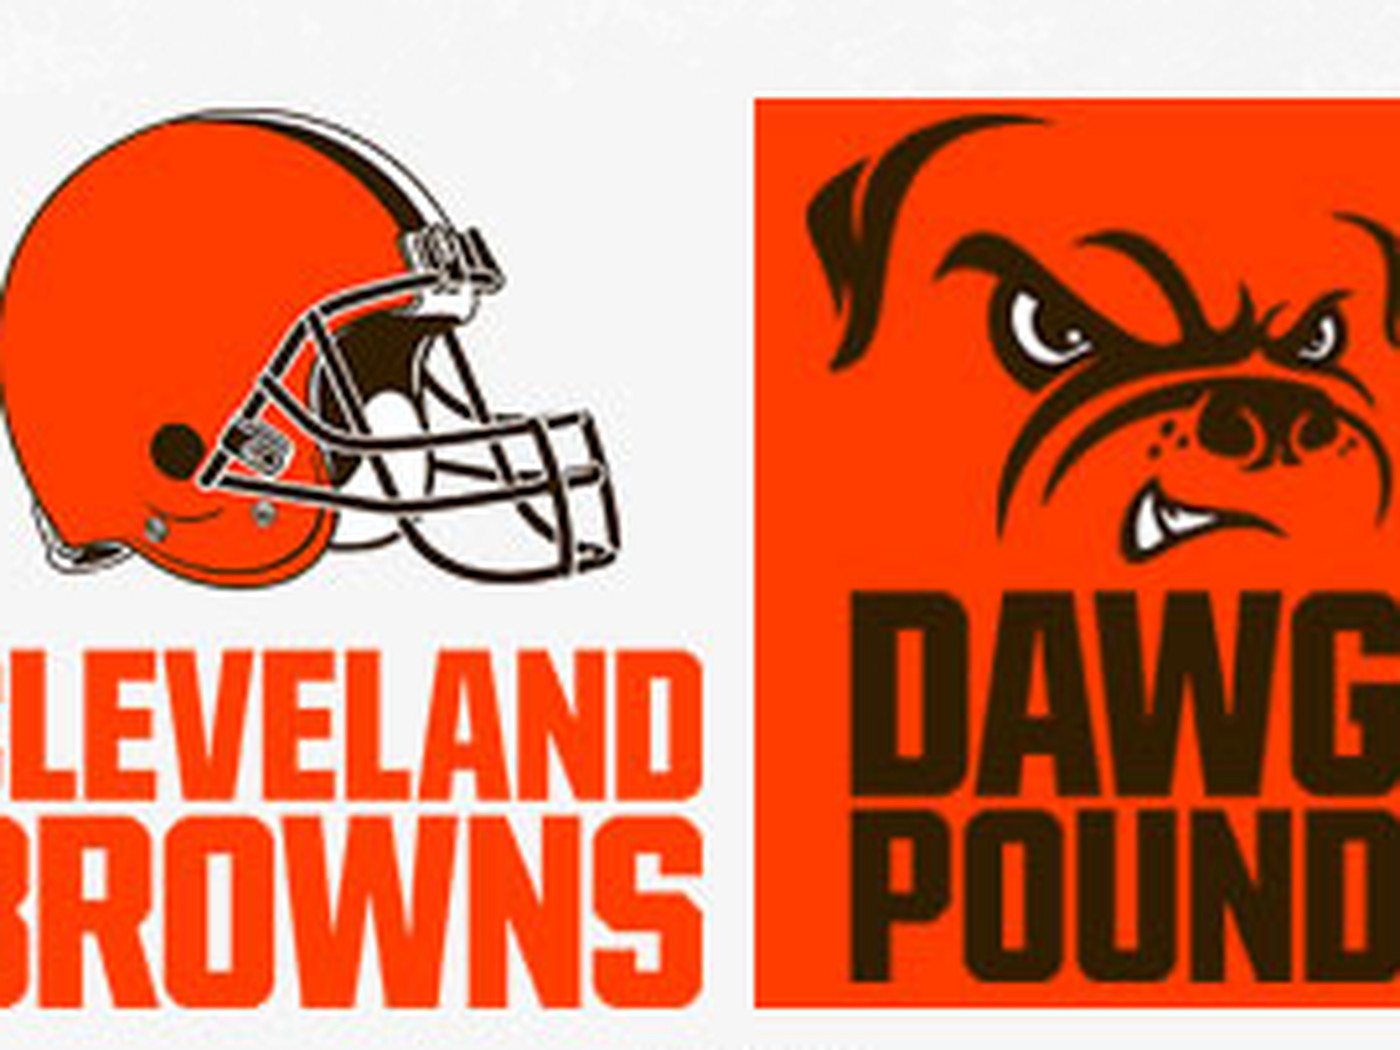 The Browns have a new logo that looks like the old logo